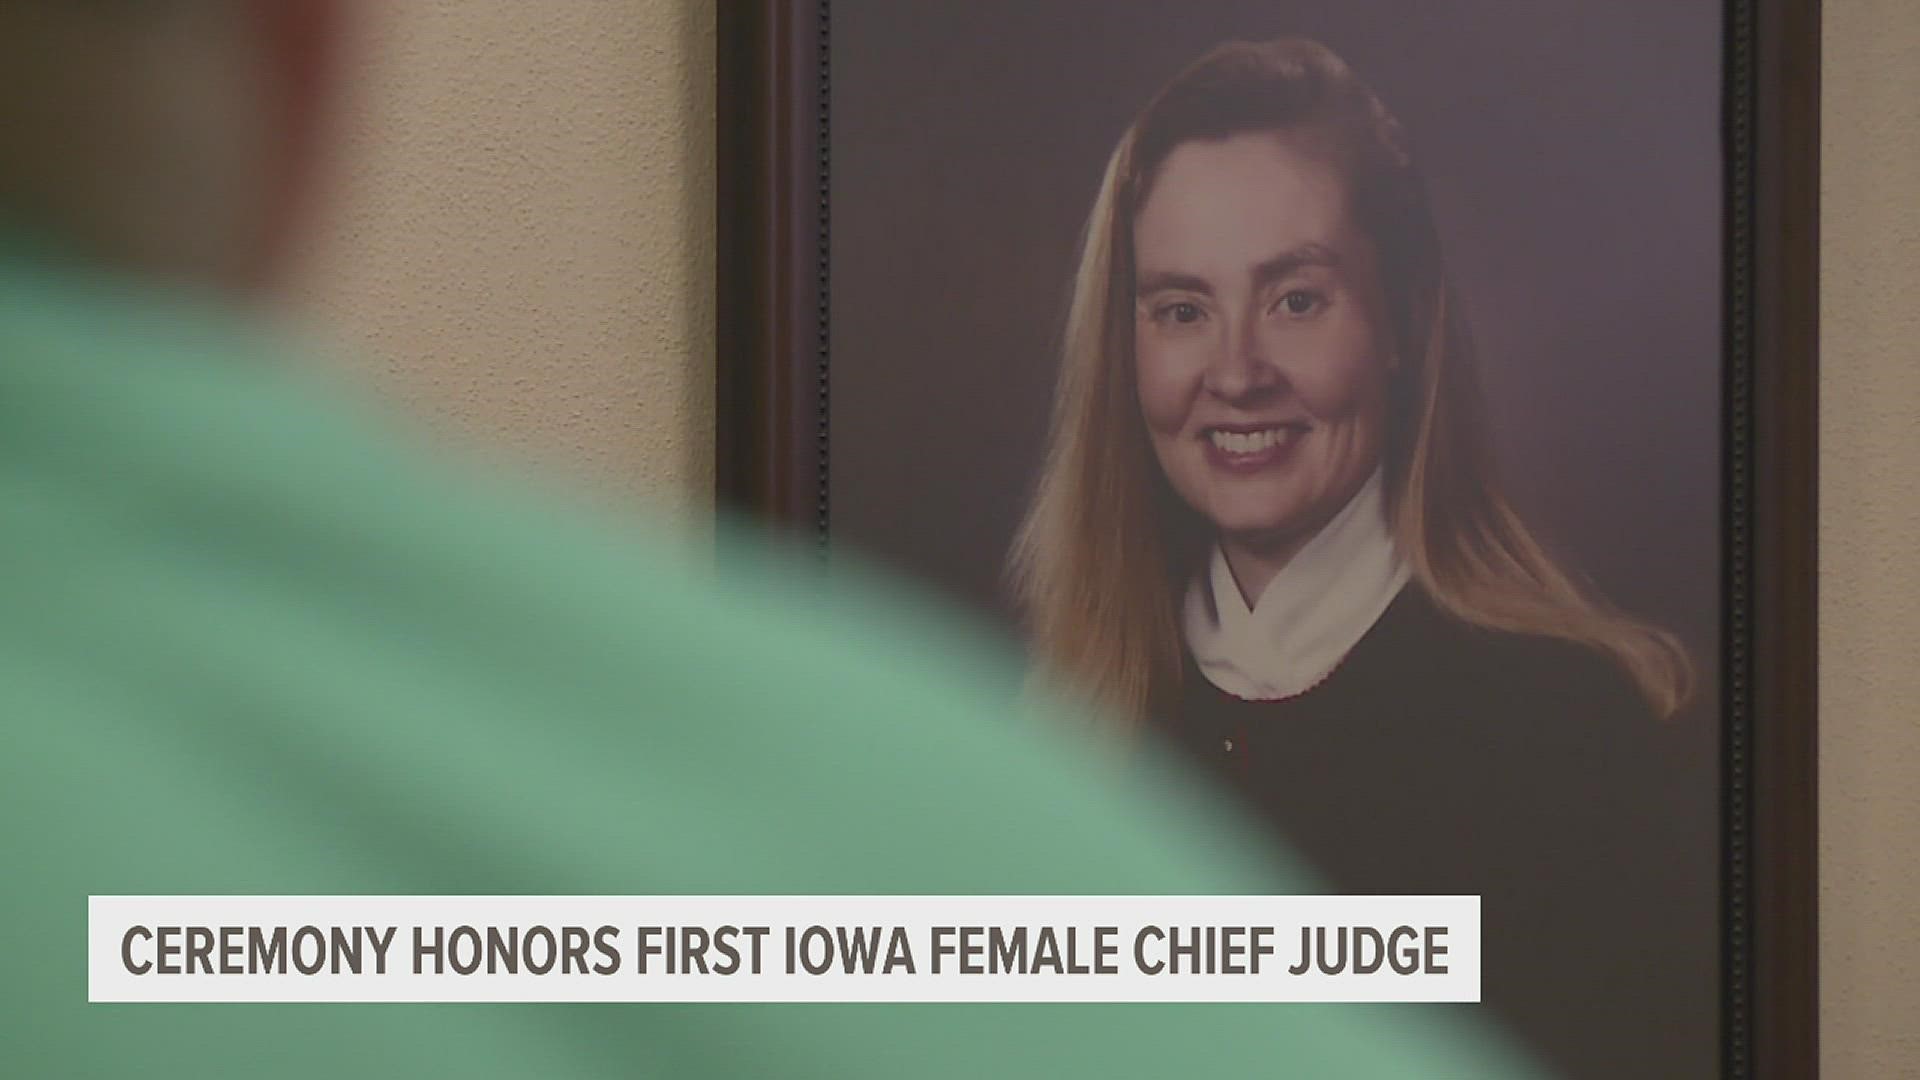 She spent more than 20 years as a judge, seven as chief, in eastern Iowa.